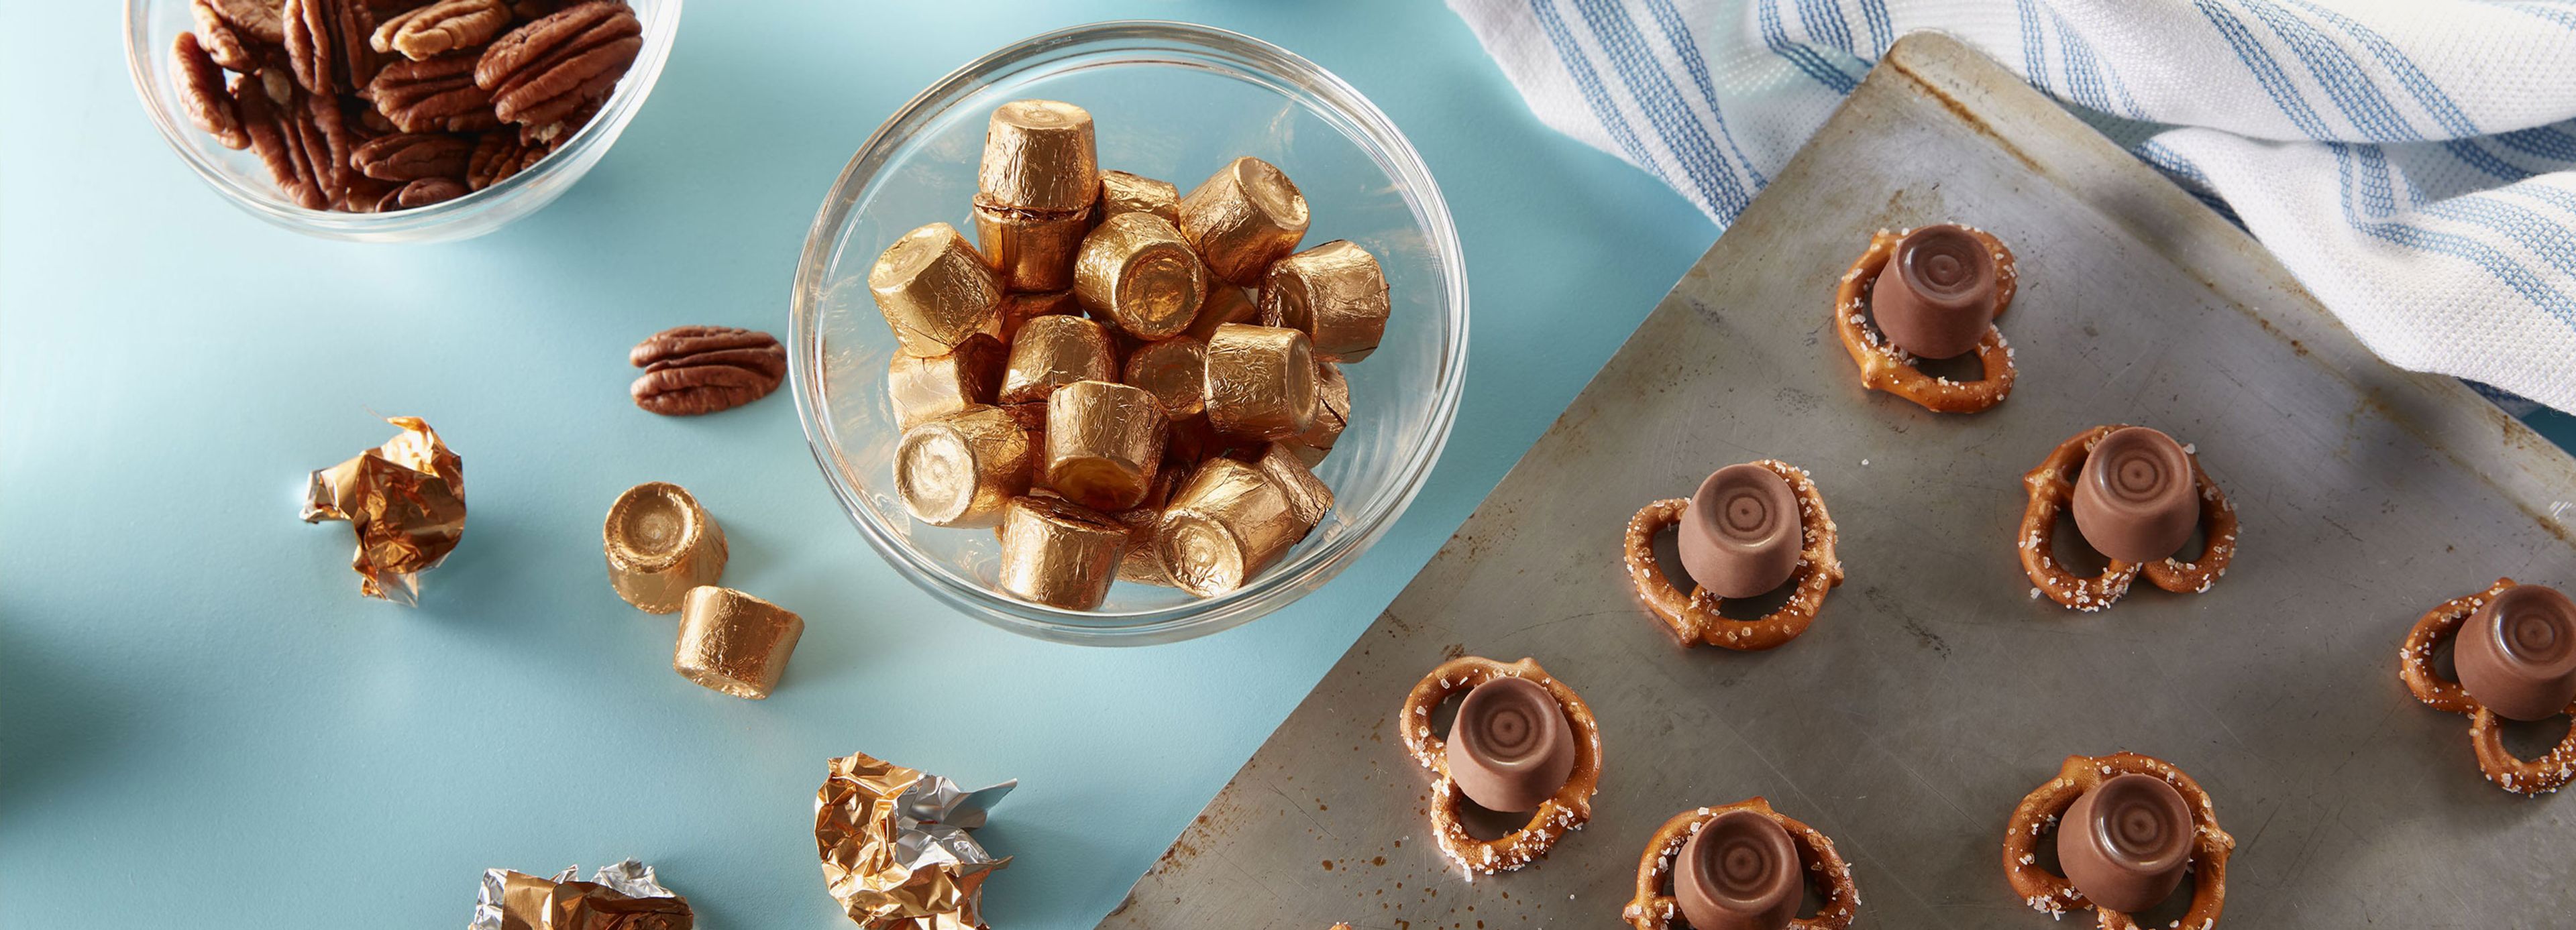 Calories in 3 rolo(s) of Rolos.